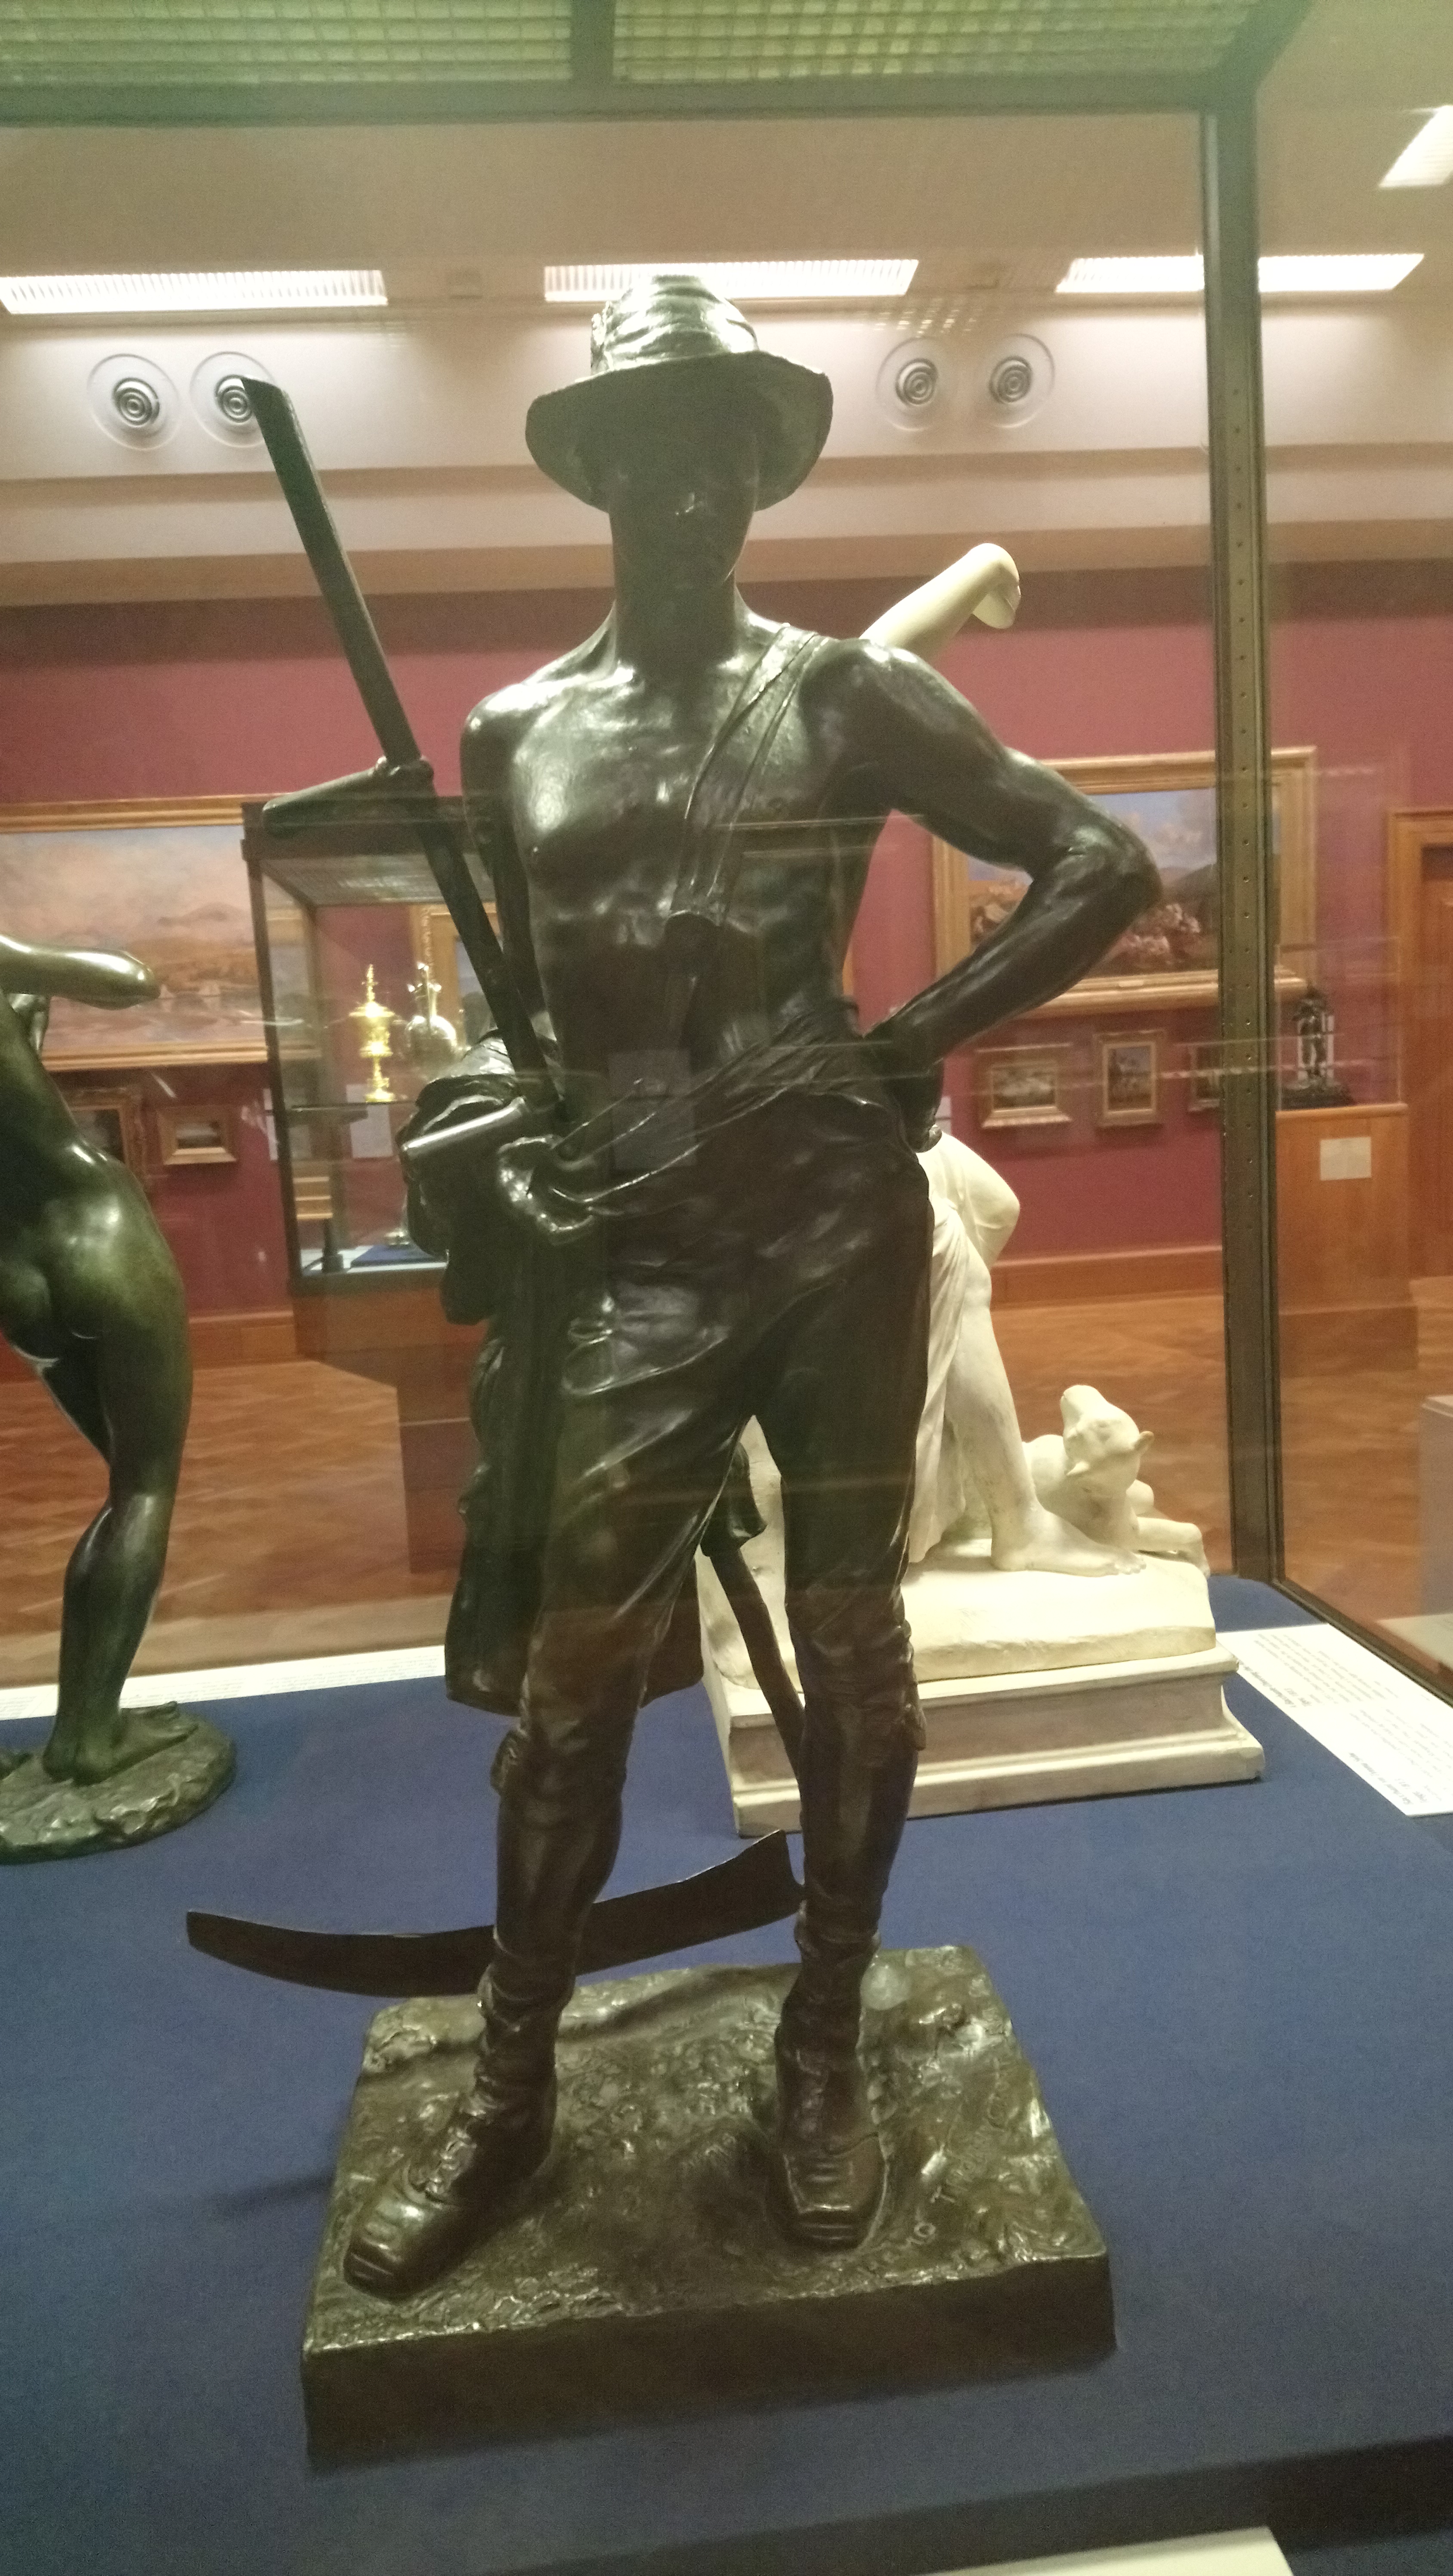 A bronze sculpture of a semi-nude male figure wearing a hat and holding a scythe